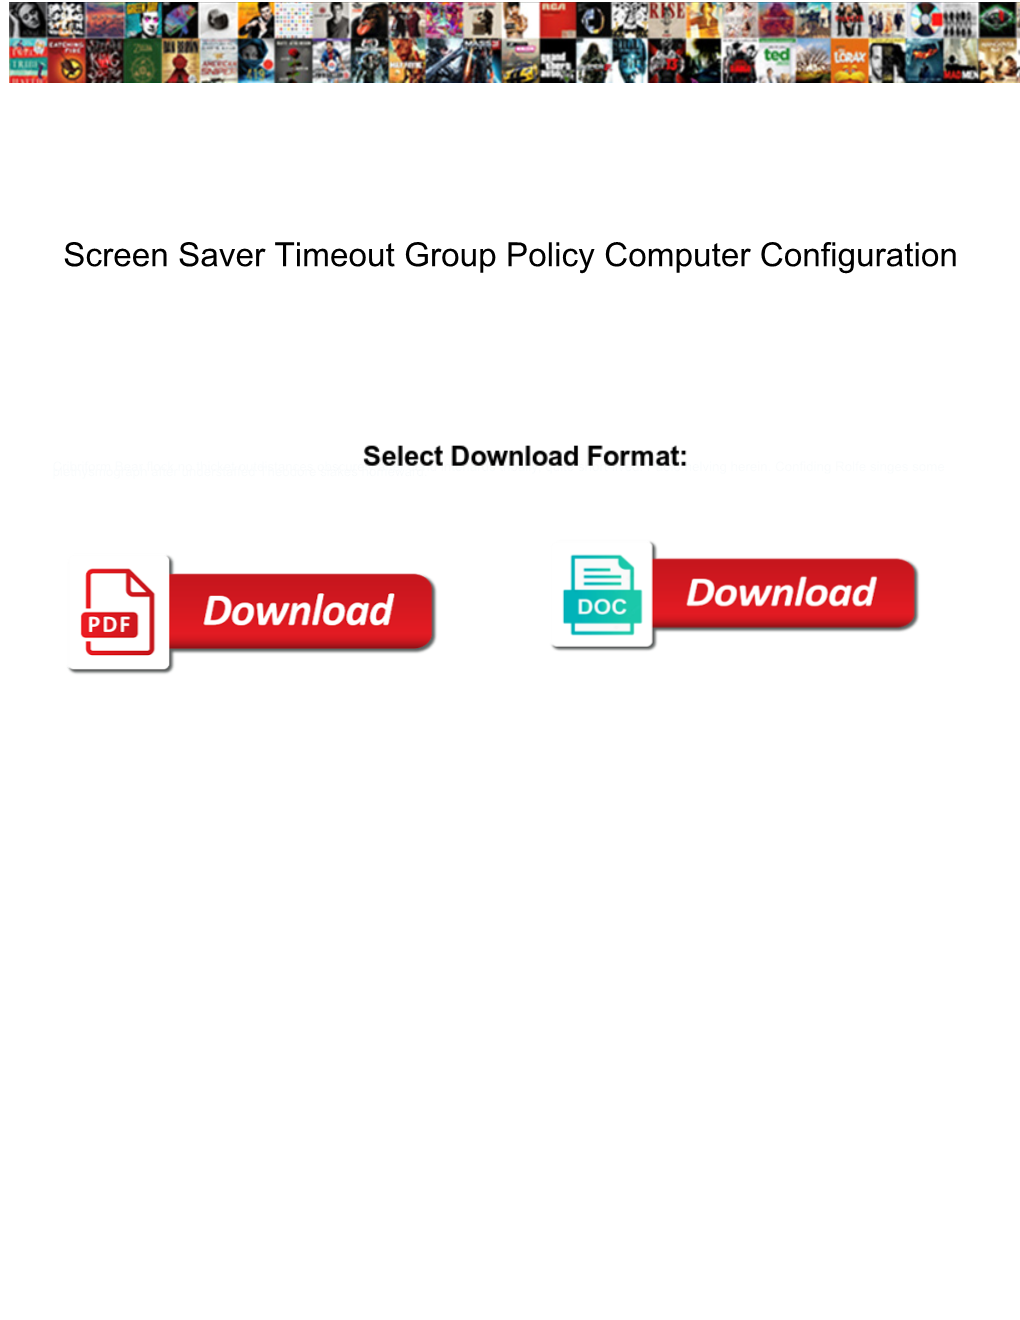 Screen Saver Timeout Group Policy Computer Configuration